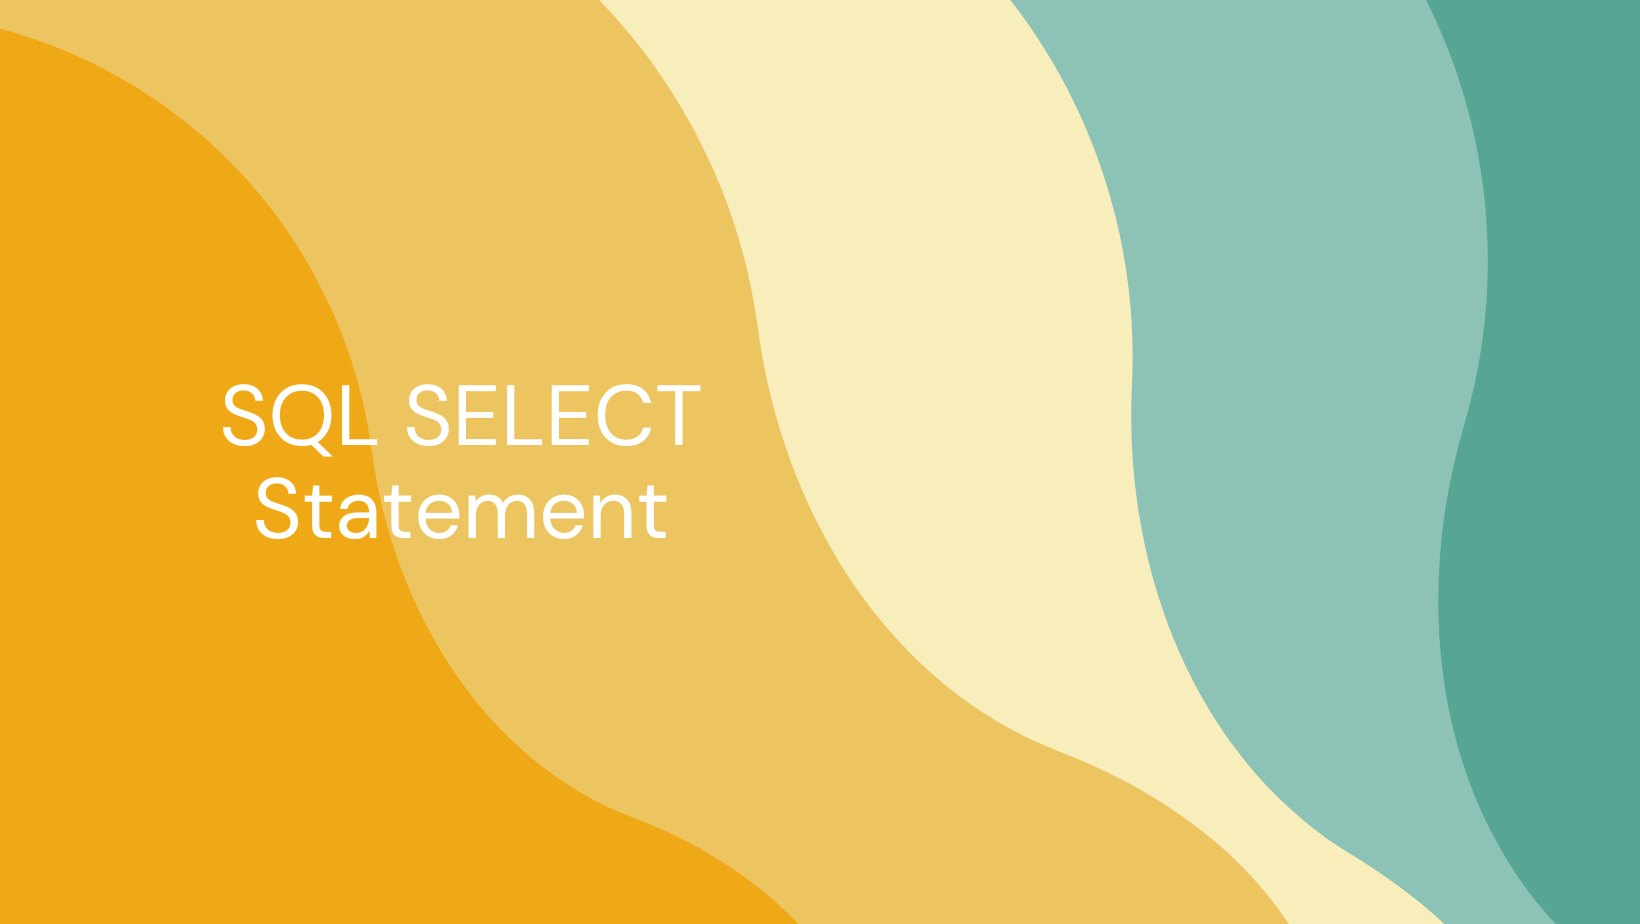 SQL SELECT Statement – How to Select Data from a Database